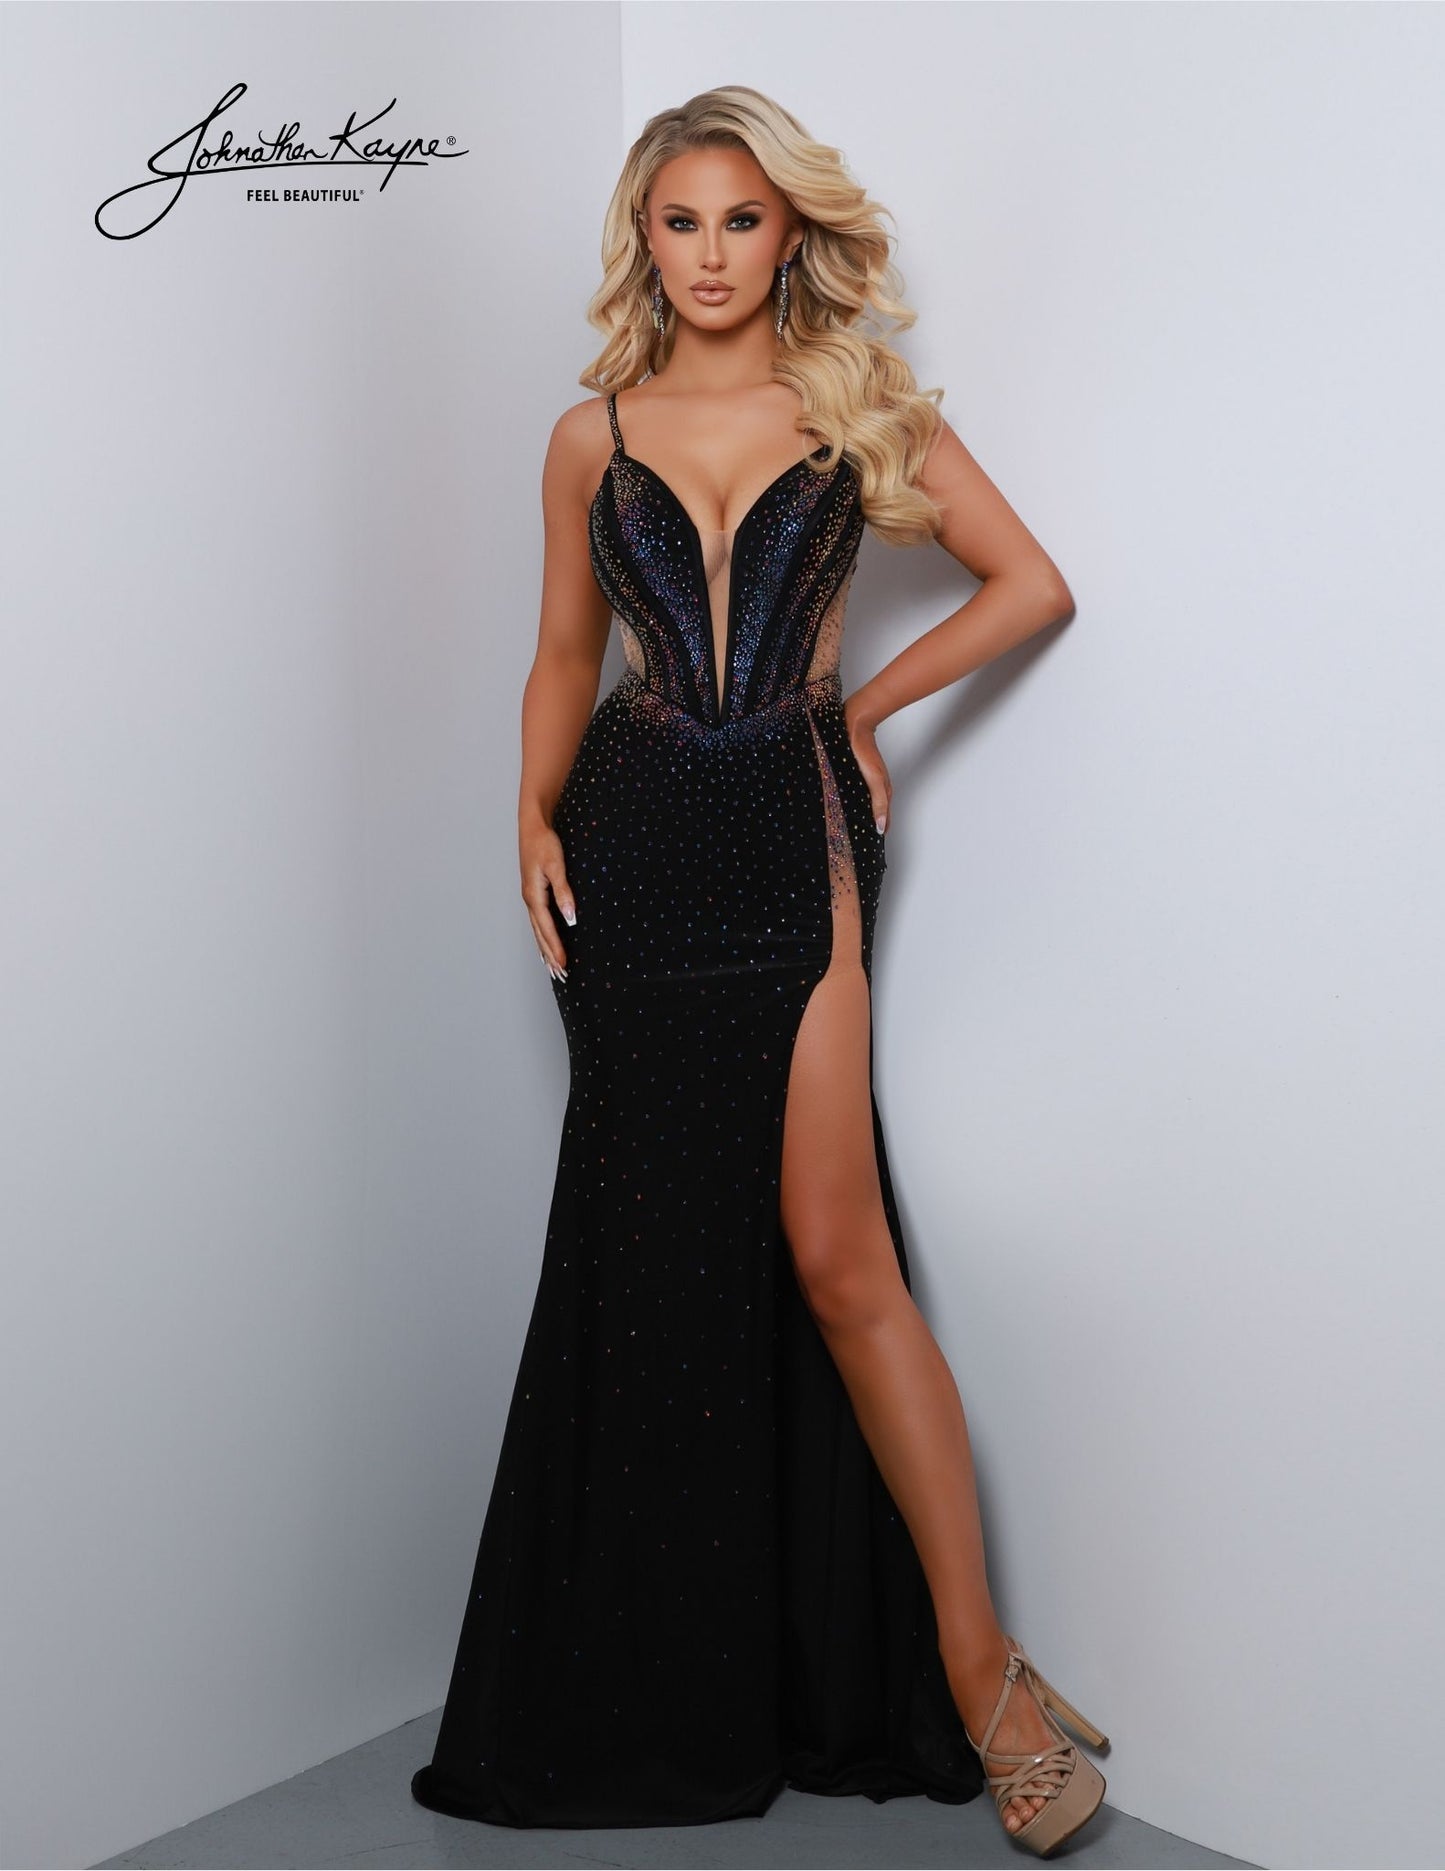 This elegant dress from Johnathan Kayne 2851 is sure to make you look and feel your best. Featuring a fitted Lycra bodice and beaded V-neck plunging neckline, the gown is both glamorous and timeless. It also features a long maxi slit with mesh detailing, perfect for any formal or pageant occasion. Make jaws DROP! This exquisite 4 Way Stretch Lycra gown features a thigh-high slit, a beaded bodice with exposed boning, and a design that's destined to captivate and command attention.